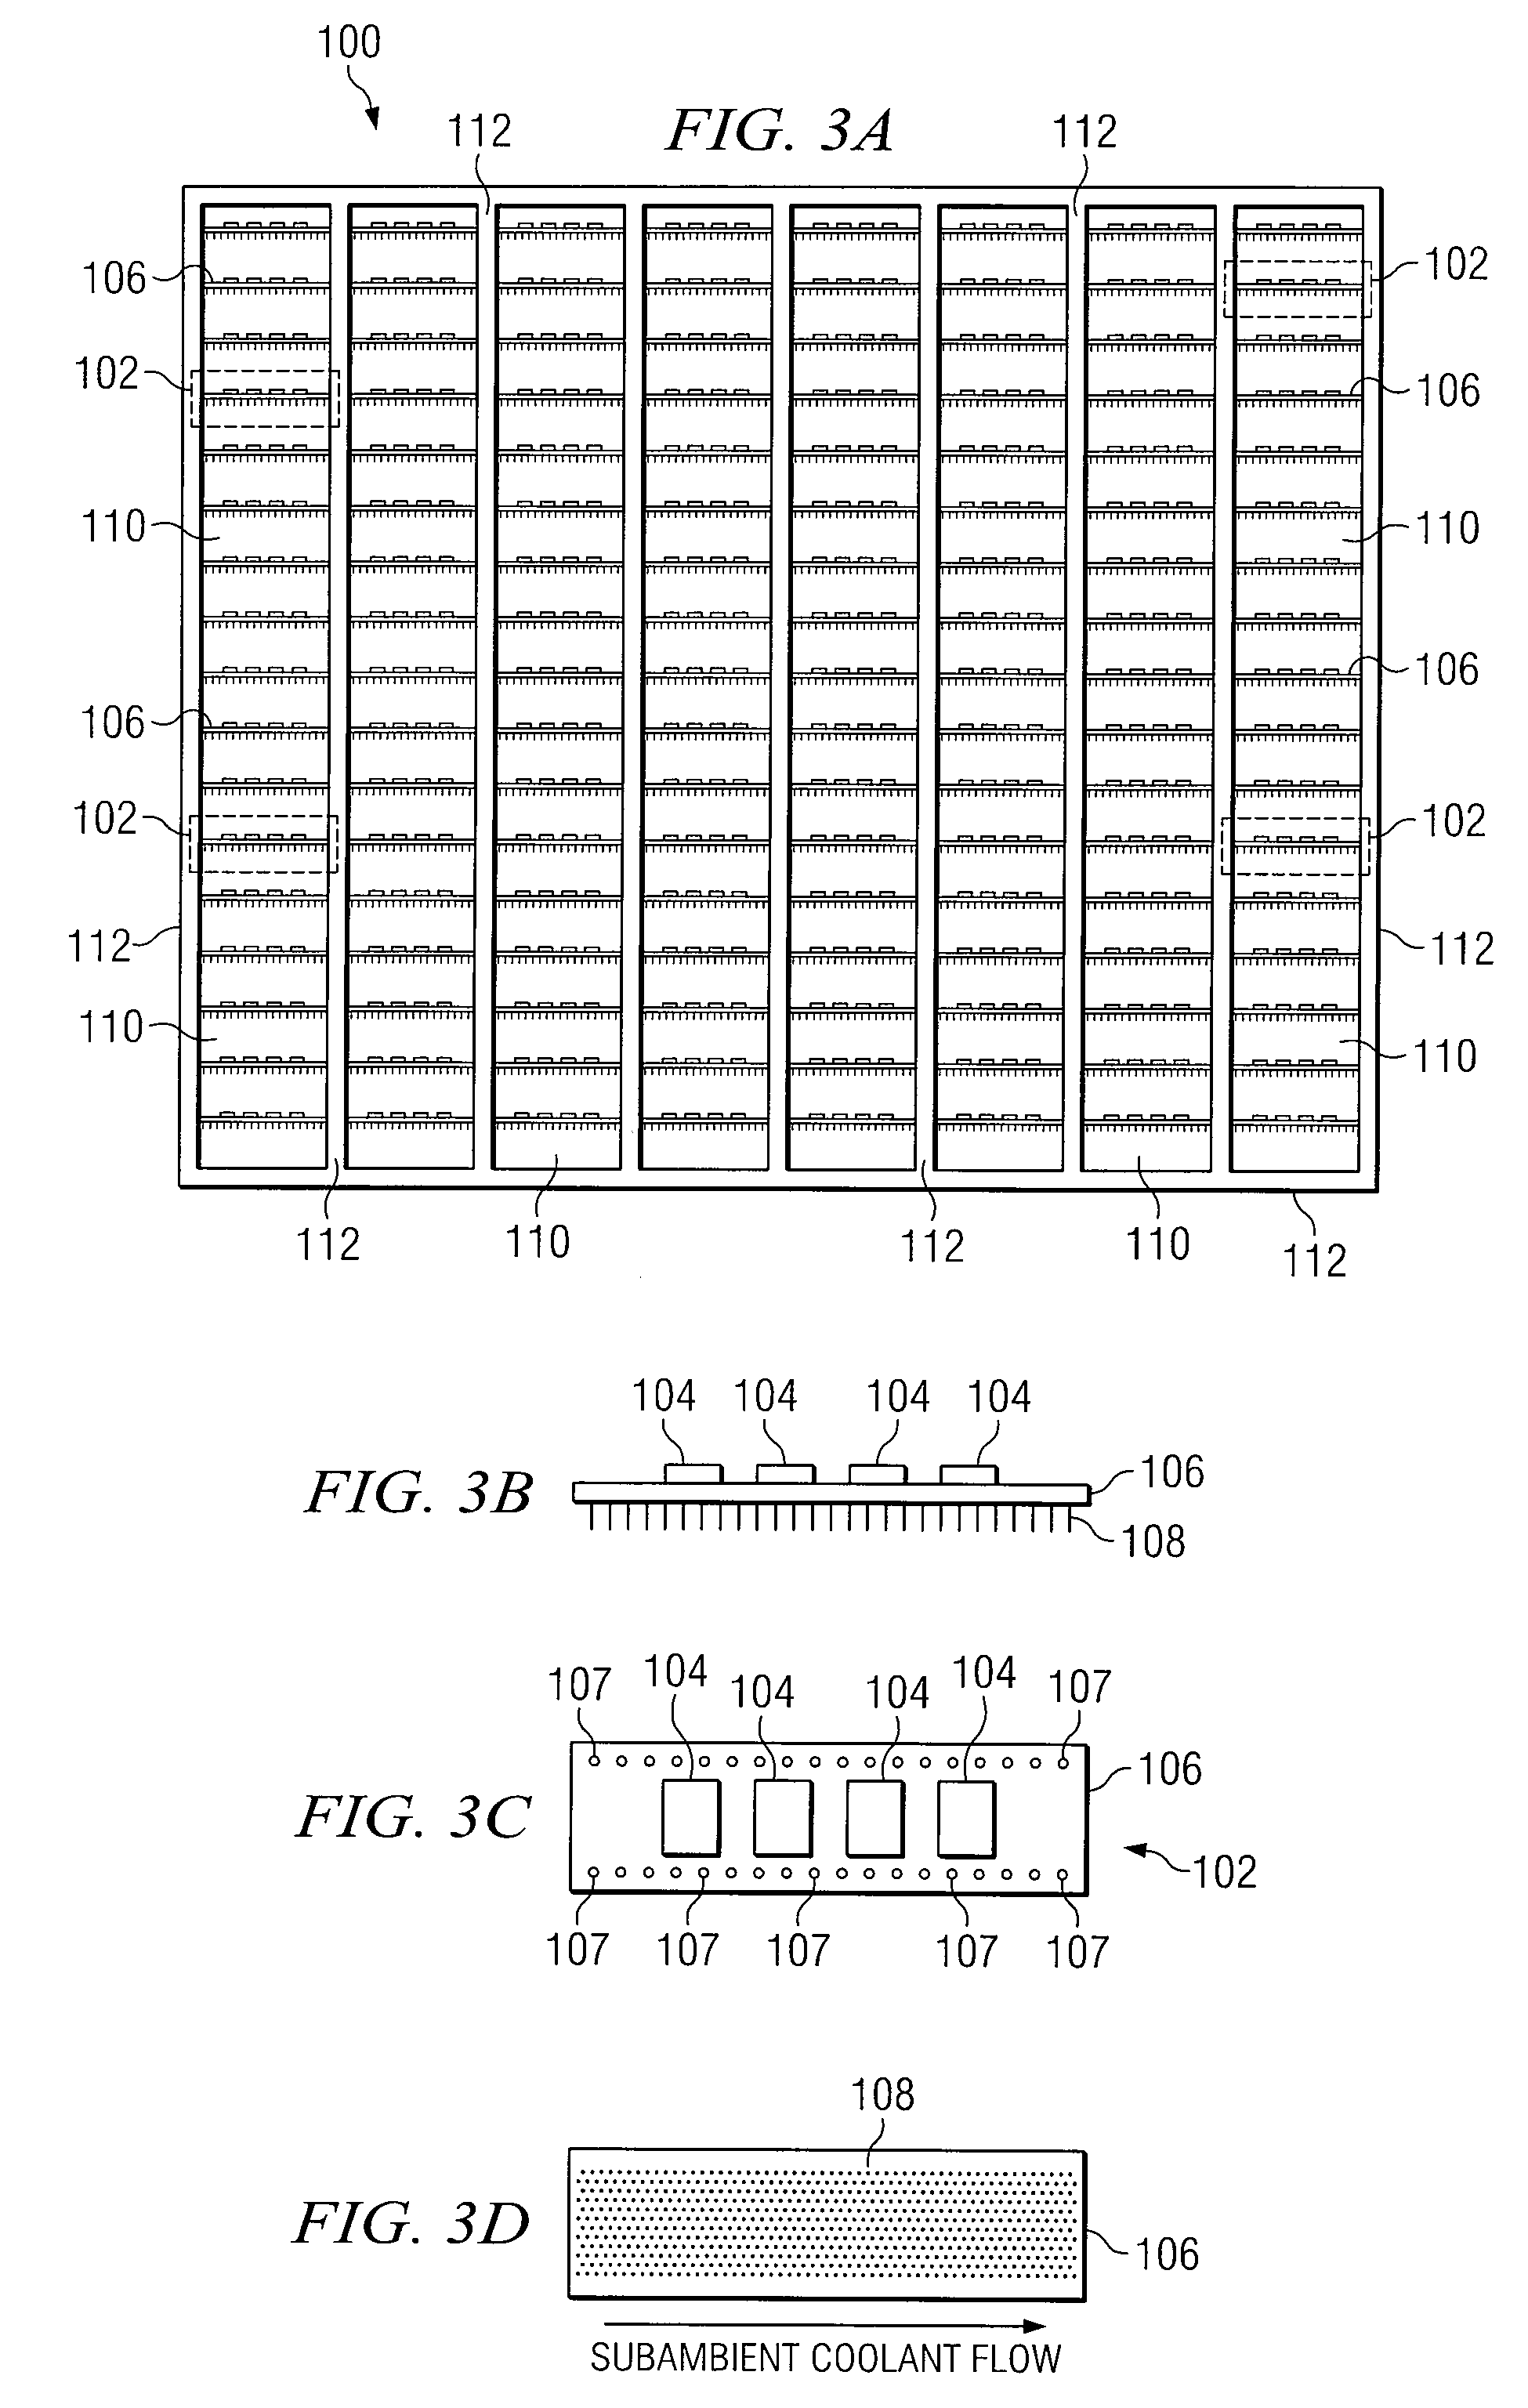 Method and Apparatus for Cooling Electronics with a Coolant at a Subambient Pressure